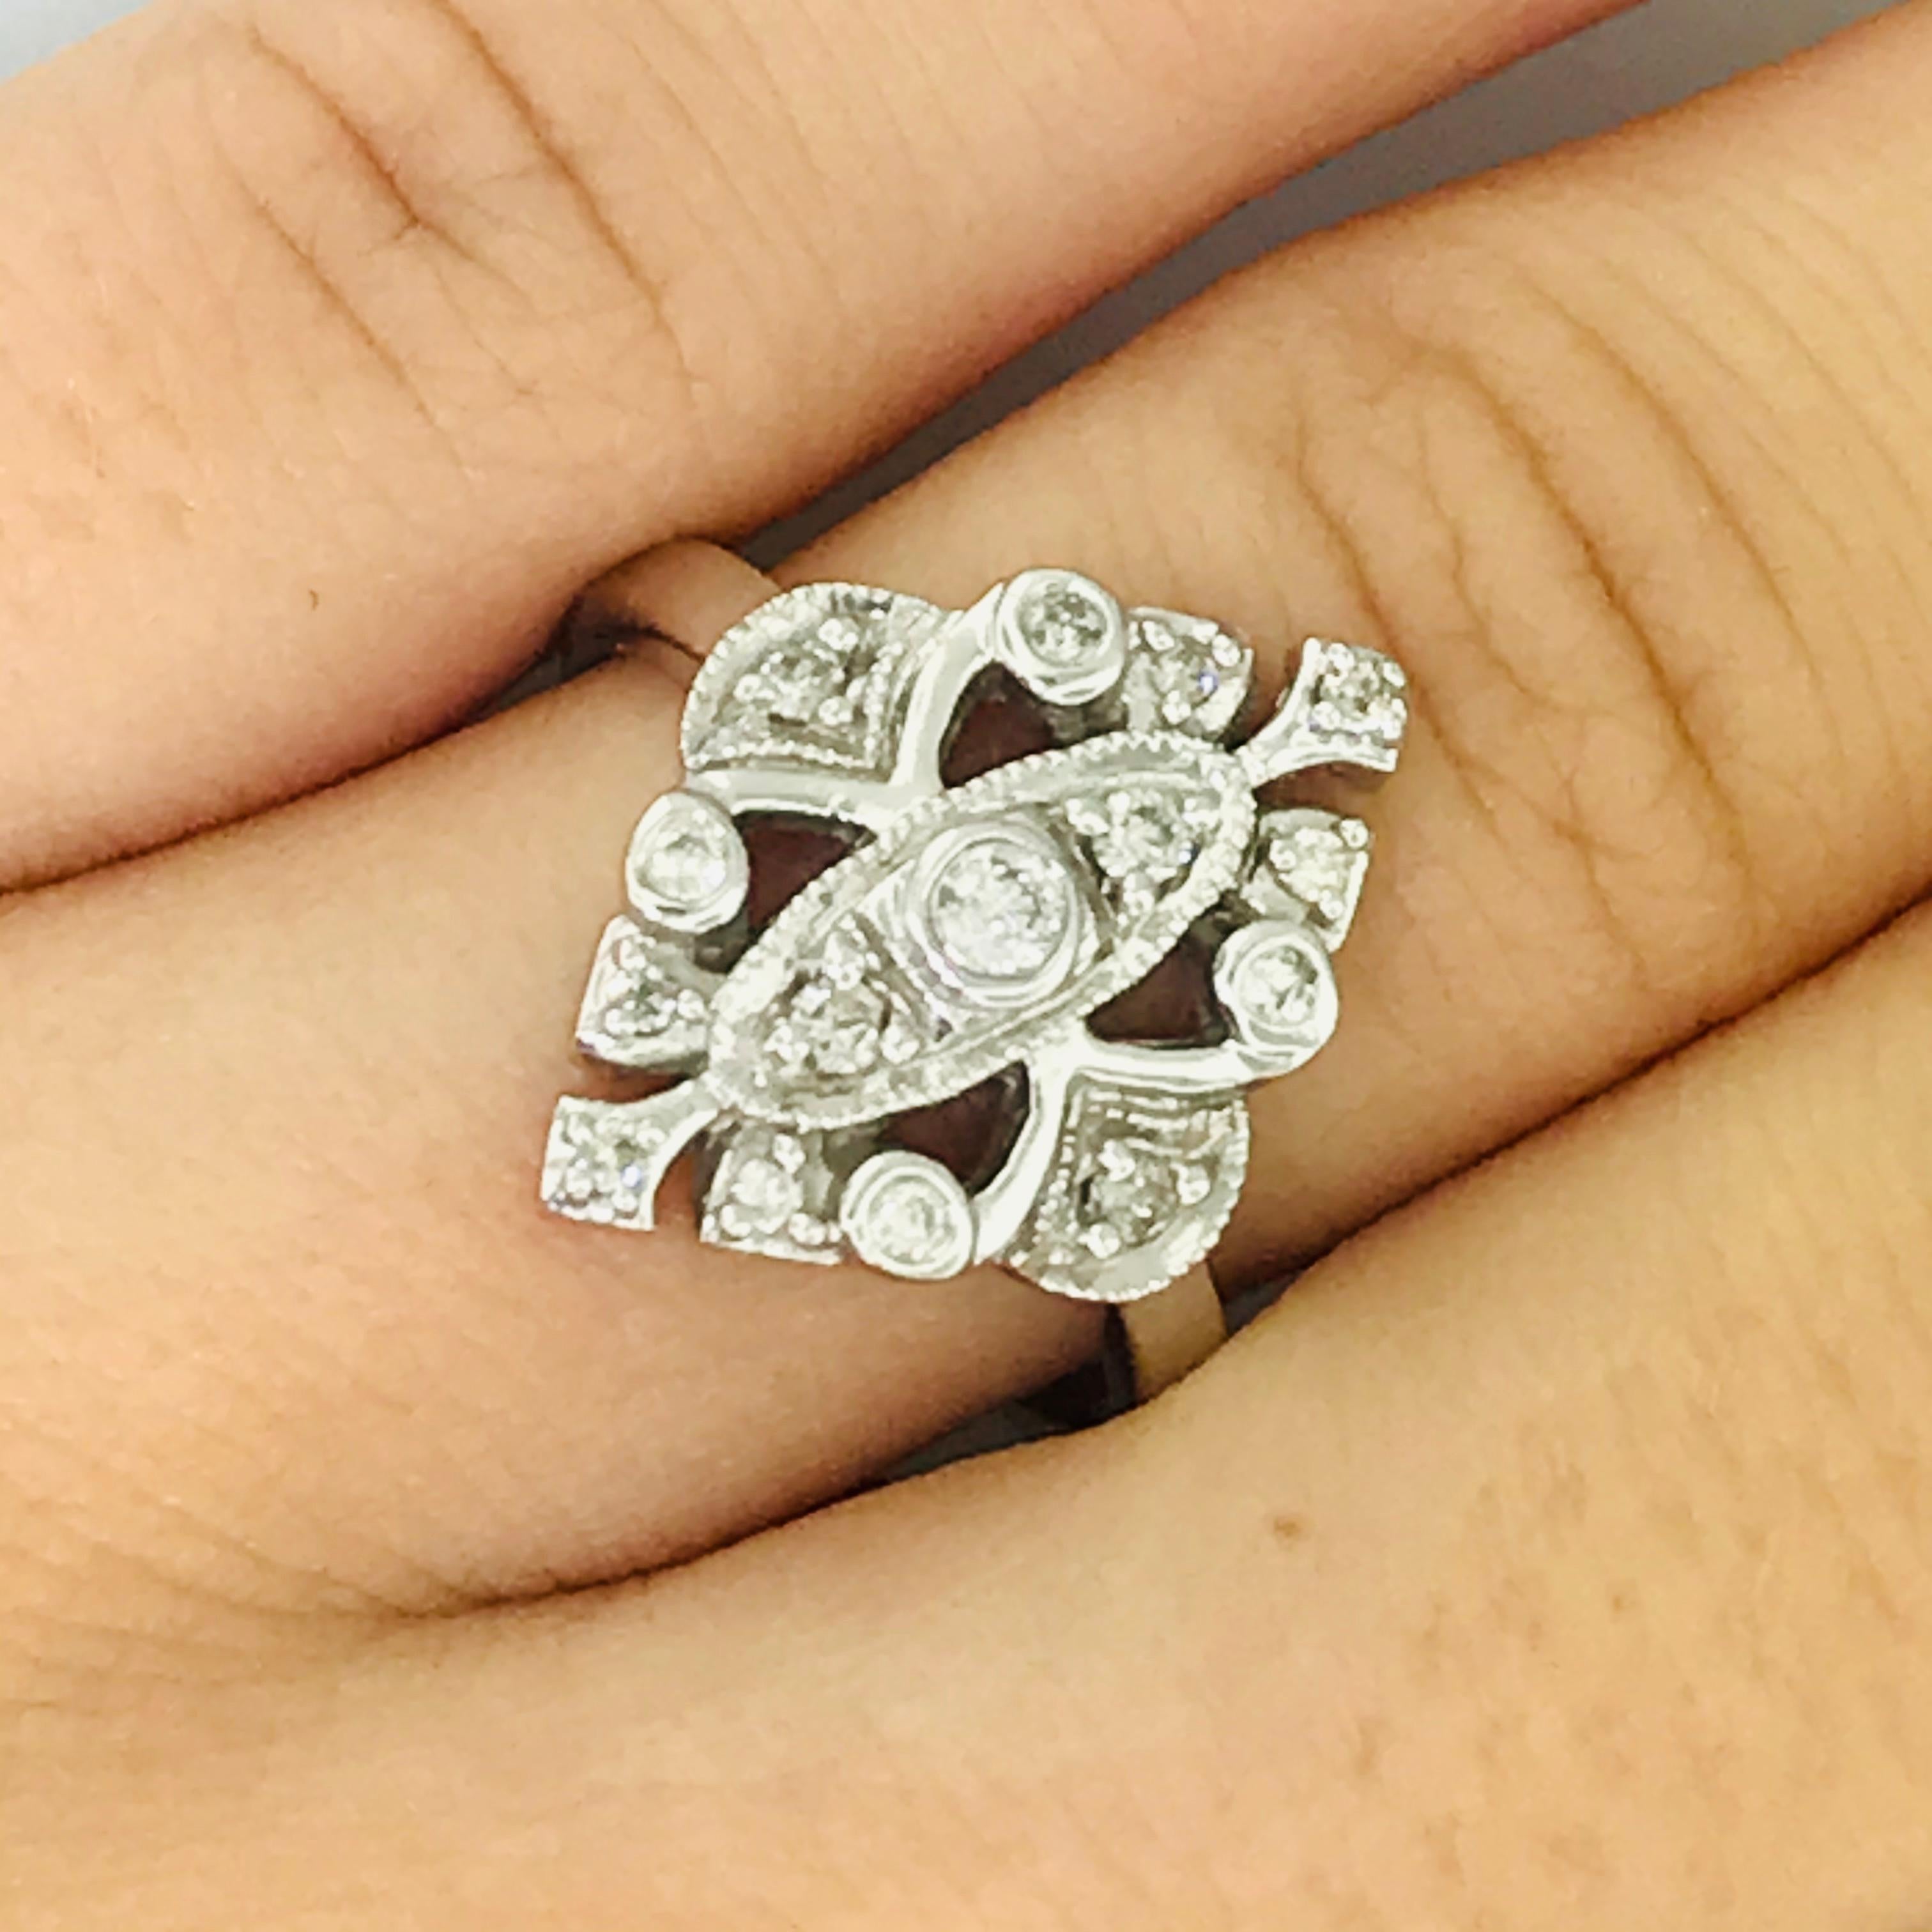 Detailing at its Finest! This gorgeous, vintage engagement ring is in amazing condition with bright white diamonds covering the top. The ring has hand crafted miligrain edges around the setting and a total of 15 round diamonds. This ring is a great